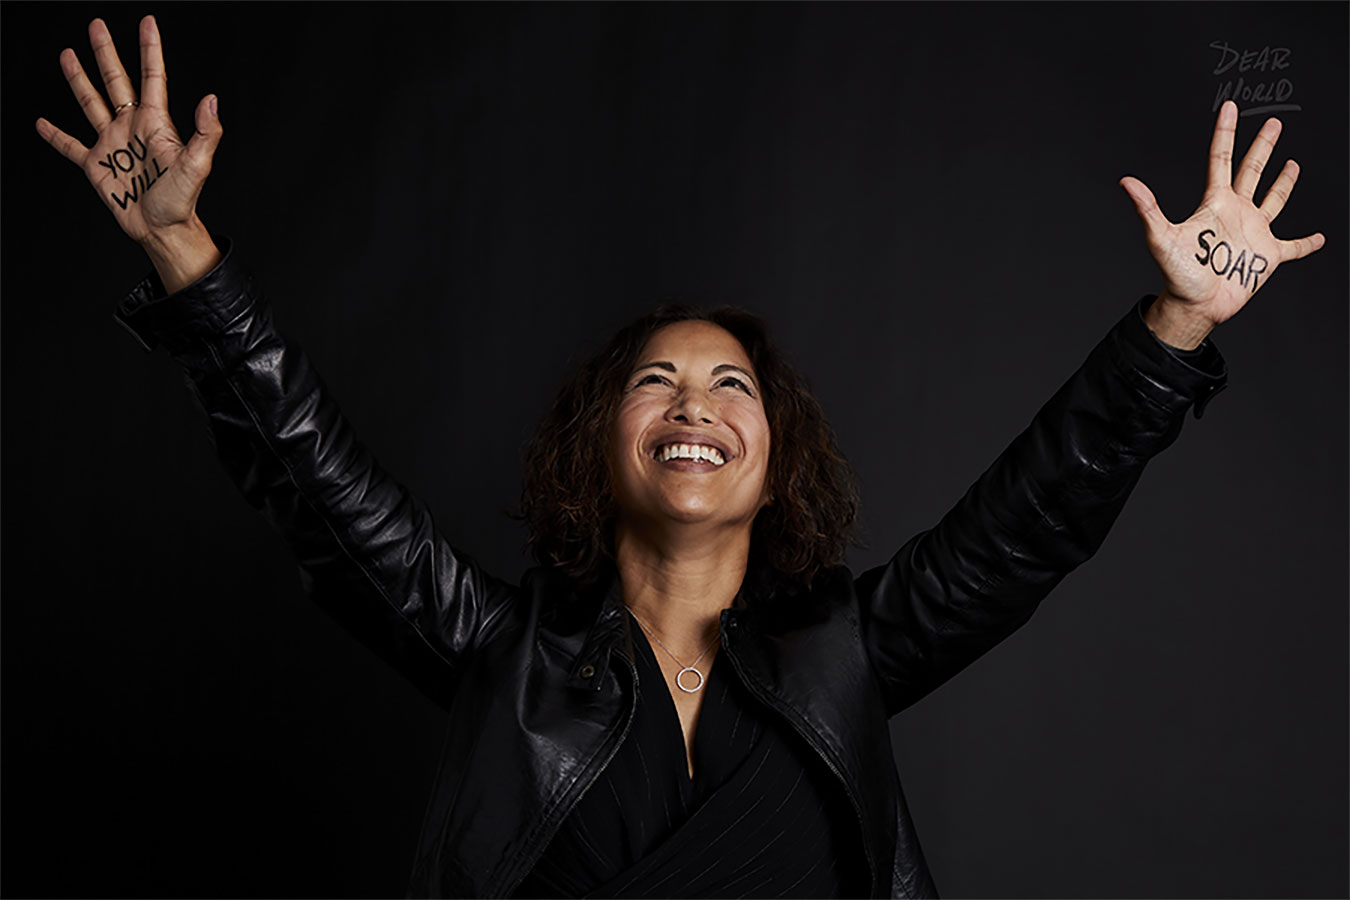 An image of Diana Cruz Solash, Vice President of Talent and ID&E at Vertex Pharmaceuticals, looking up and smiling with her hands in the air and the words “You will” written on her right hand and “Soar” written on her left hand.